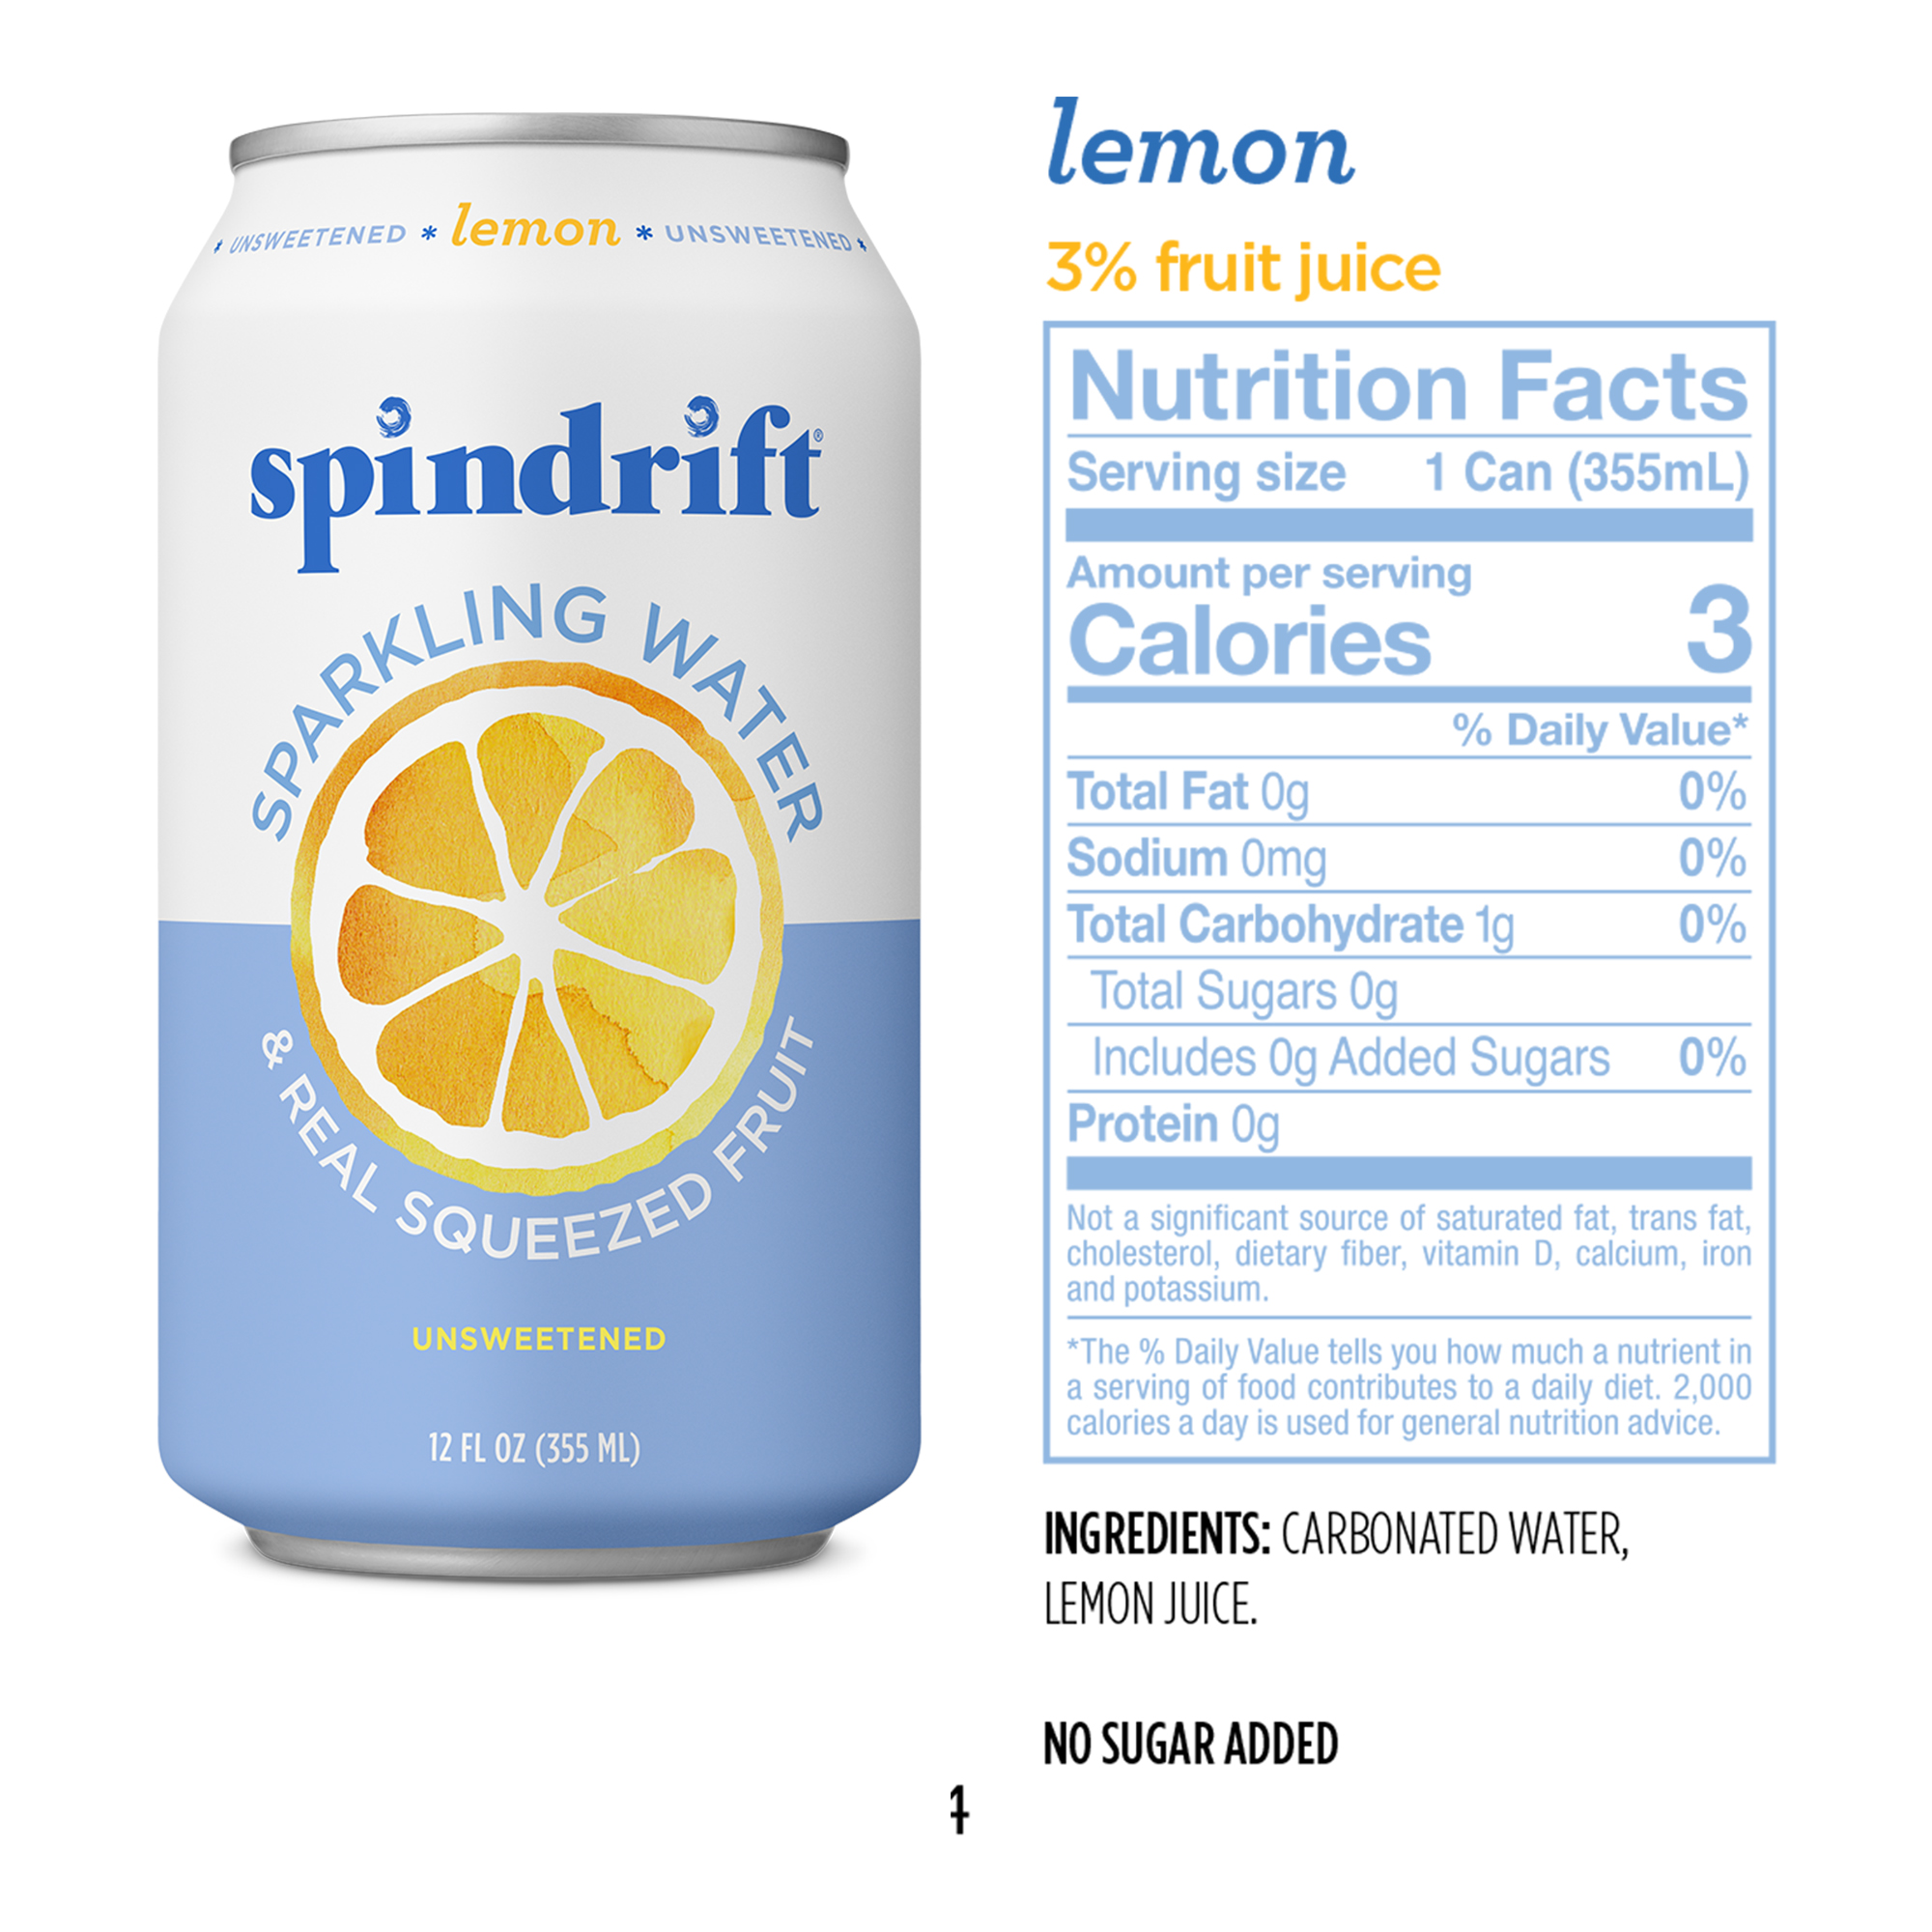 Spindrift Sparkling Water, Lemon Flavored, Made with Real Squeezed Fruit,12 fl oz, 8 Count, No Sugar Added, 3 Calories per Can - image 3 of 7